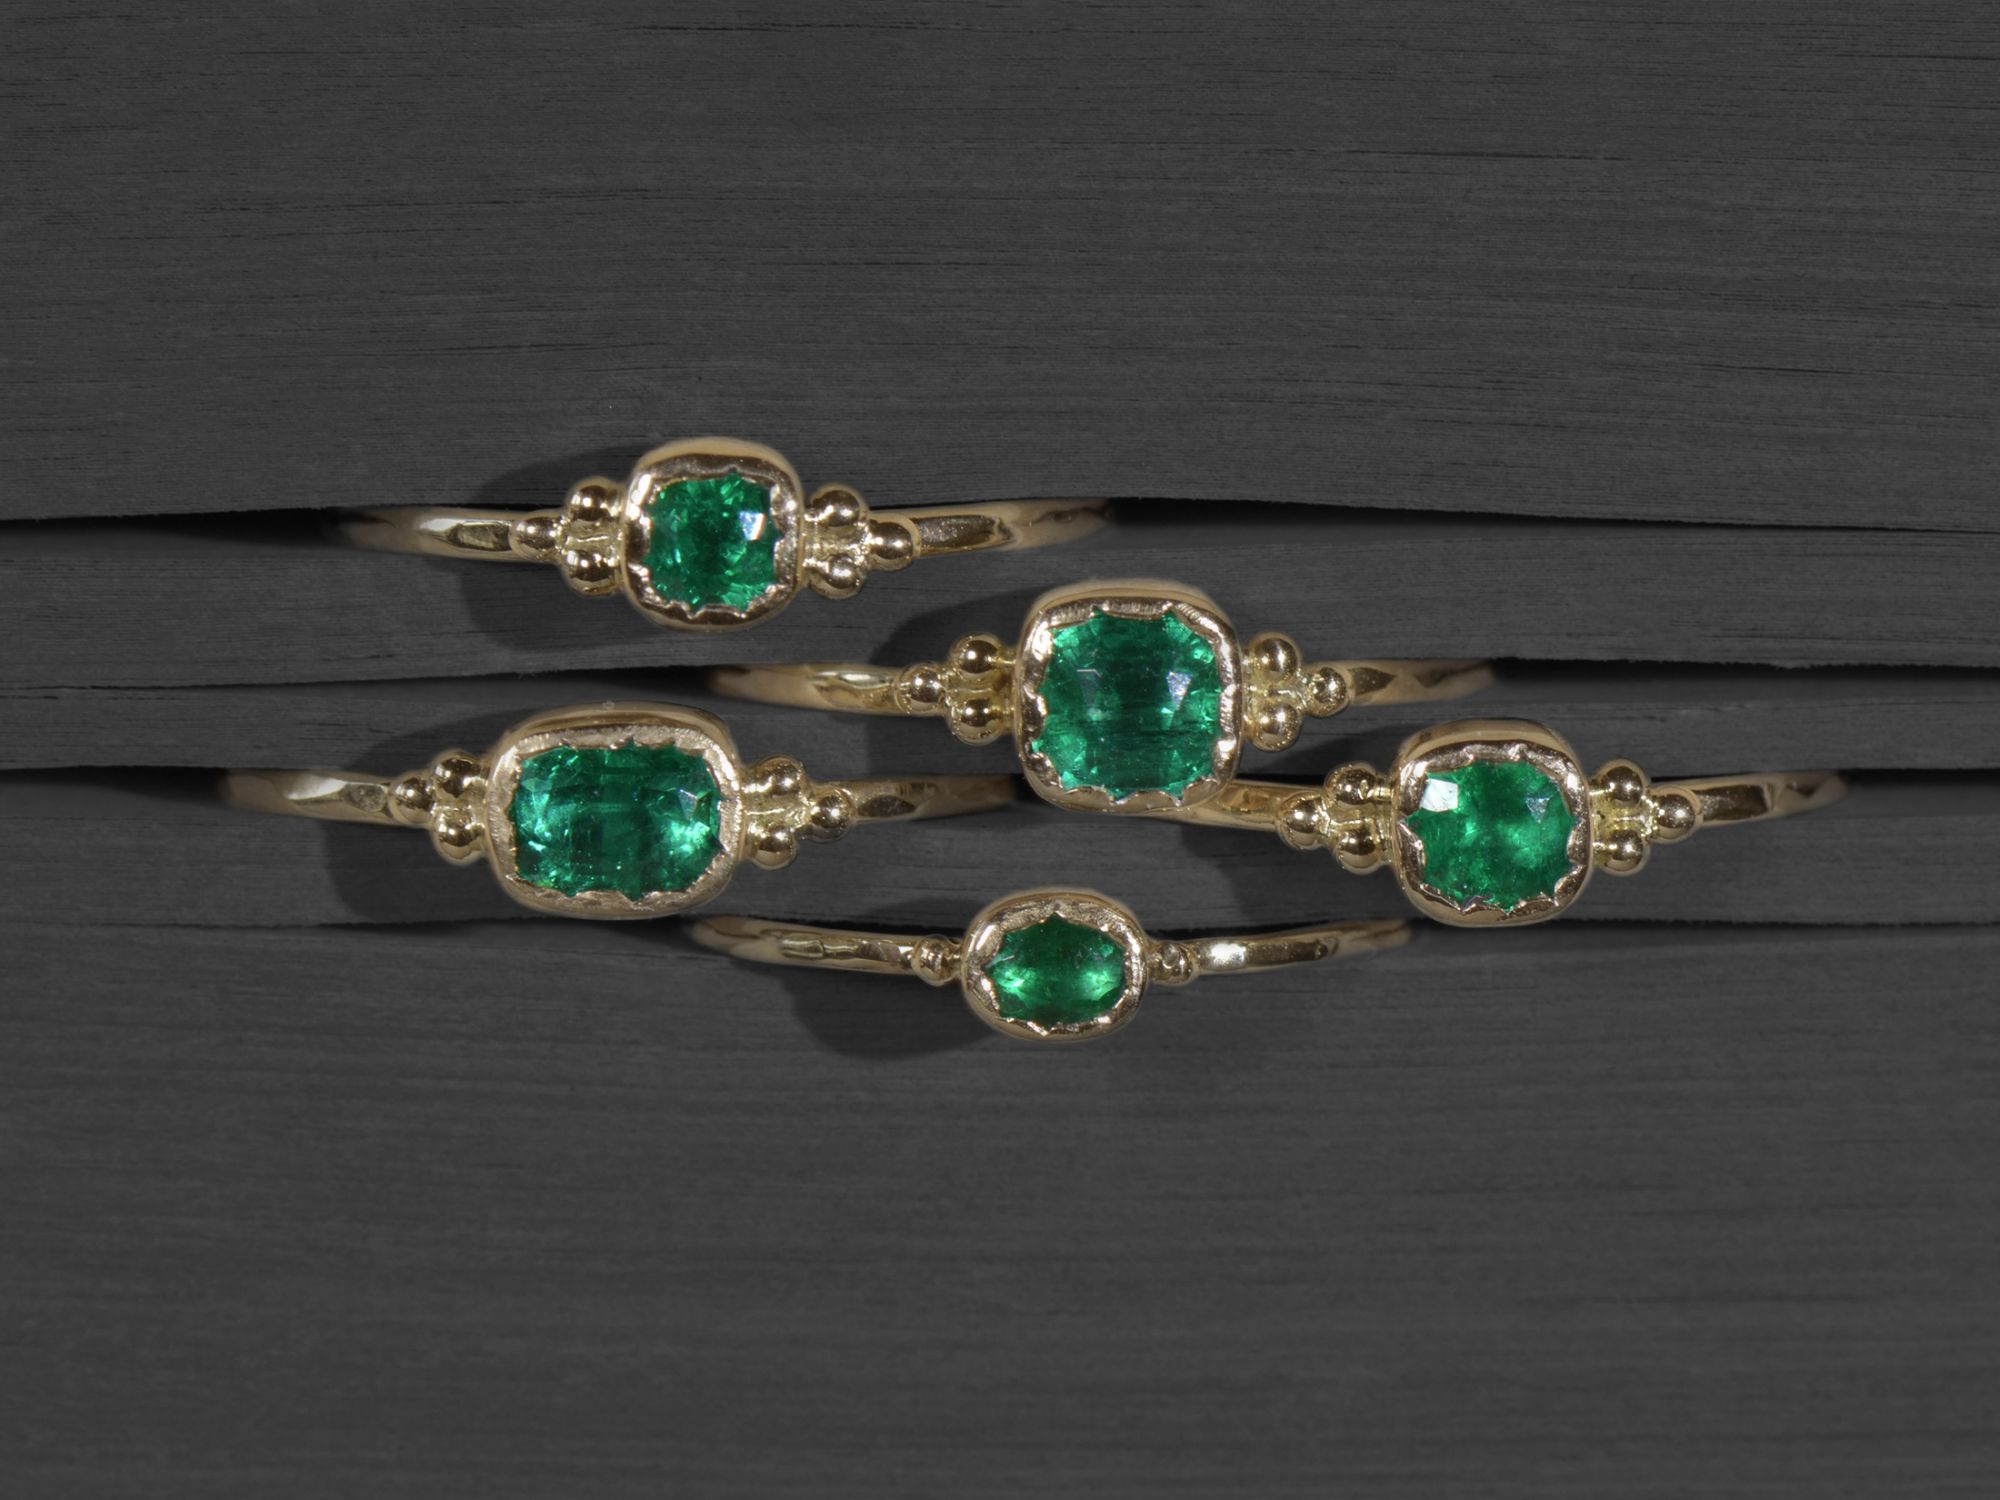 New Baby emerald ring by Emmanuelle Zysman